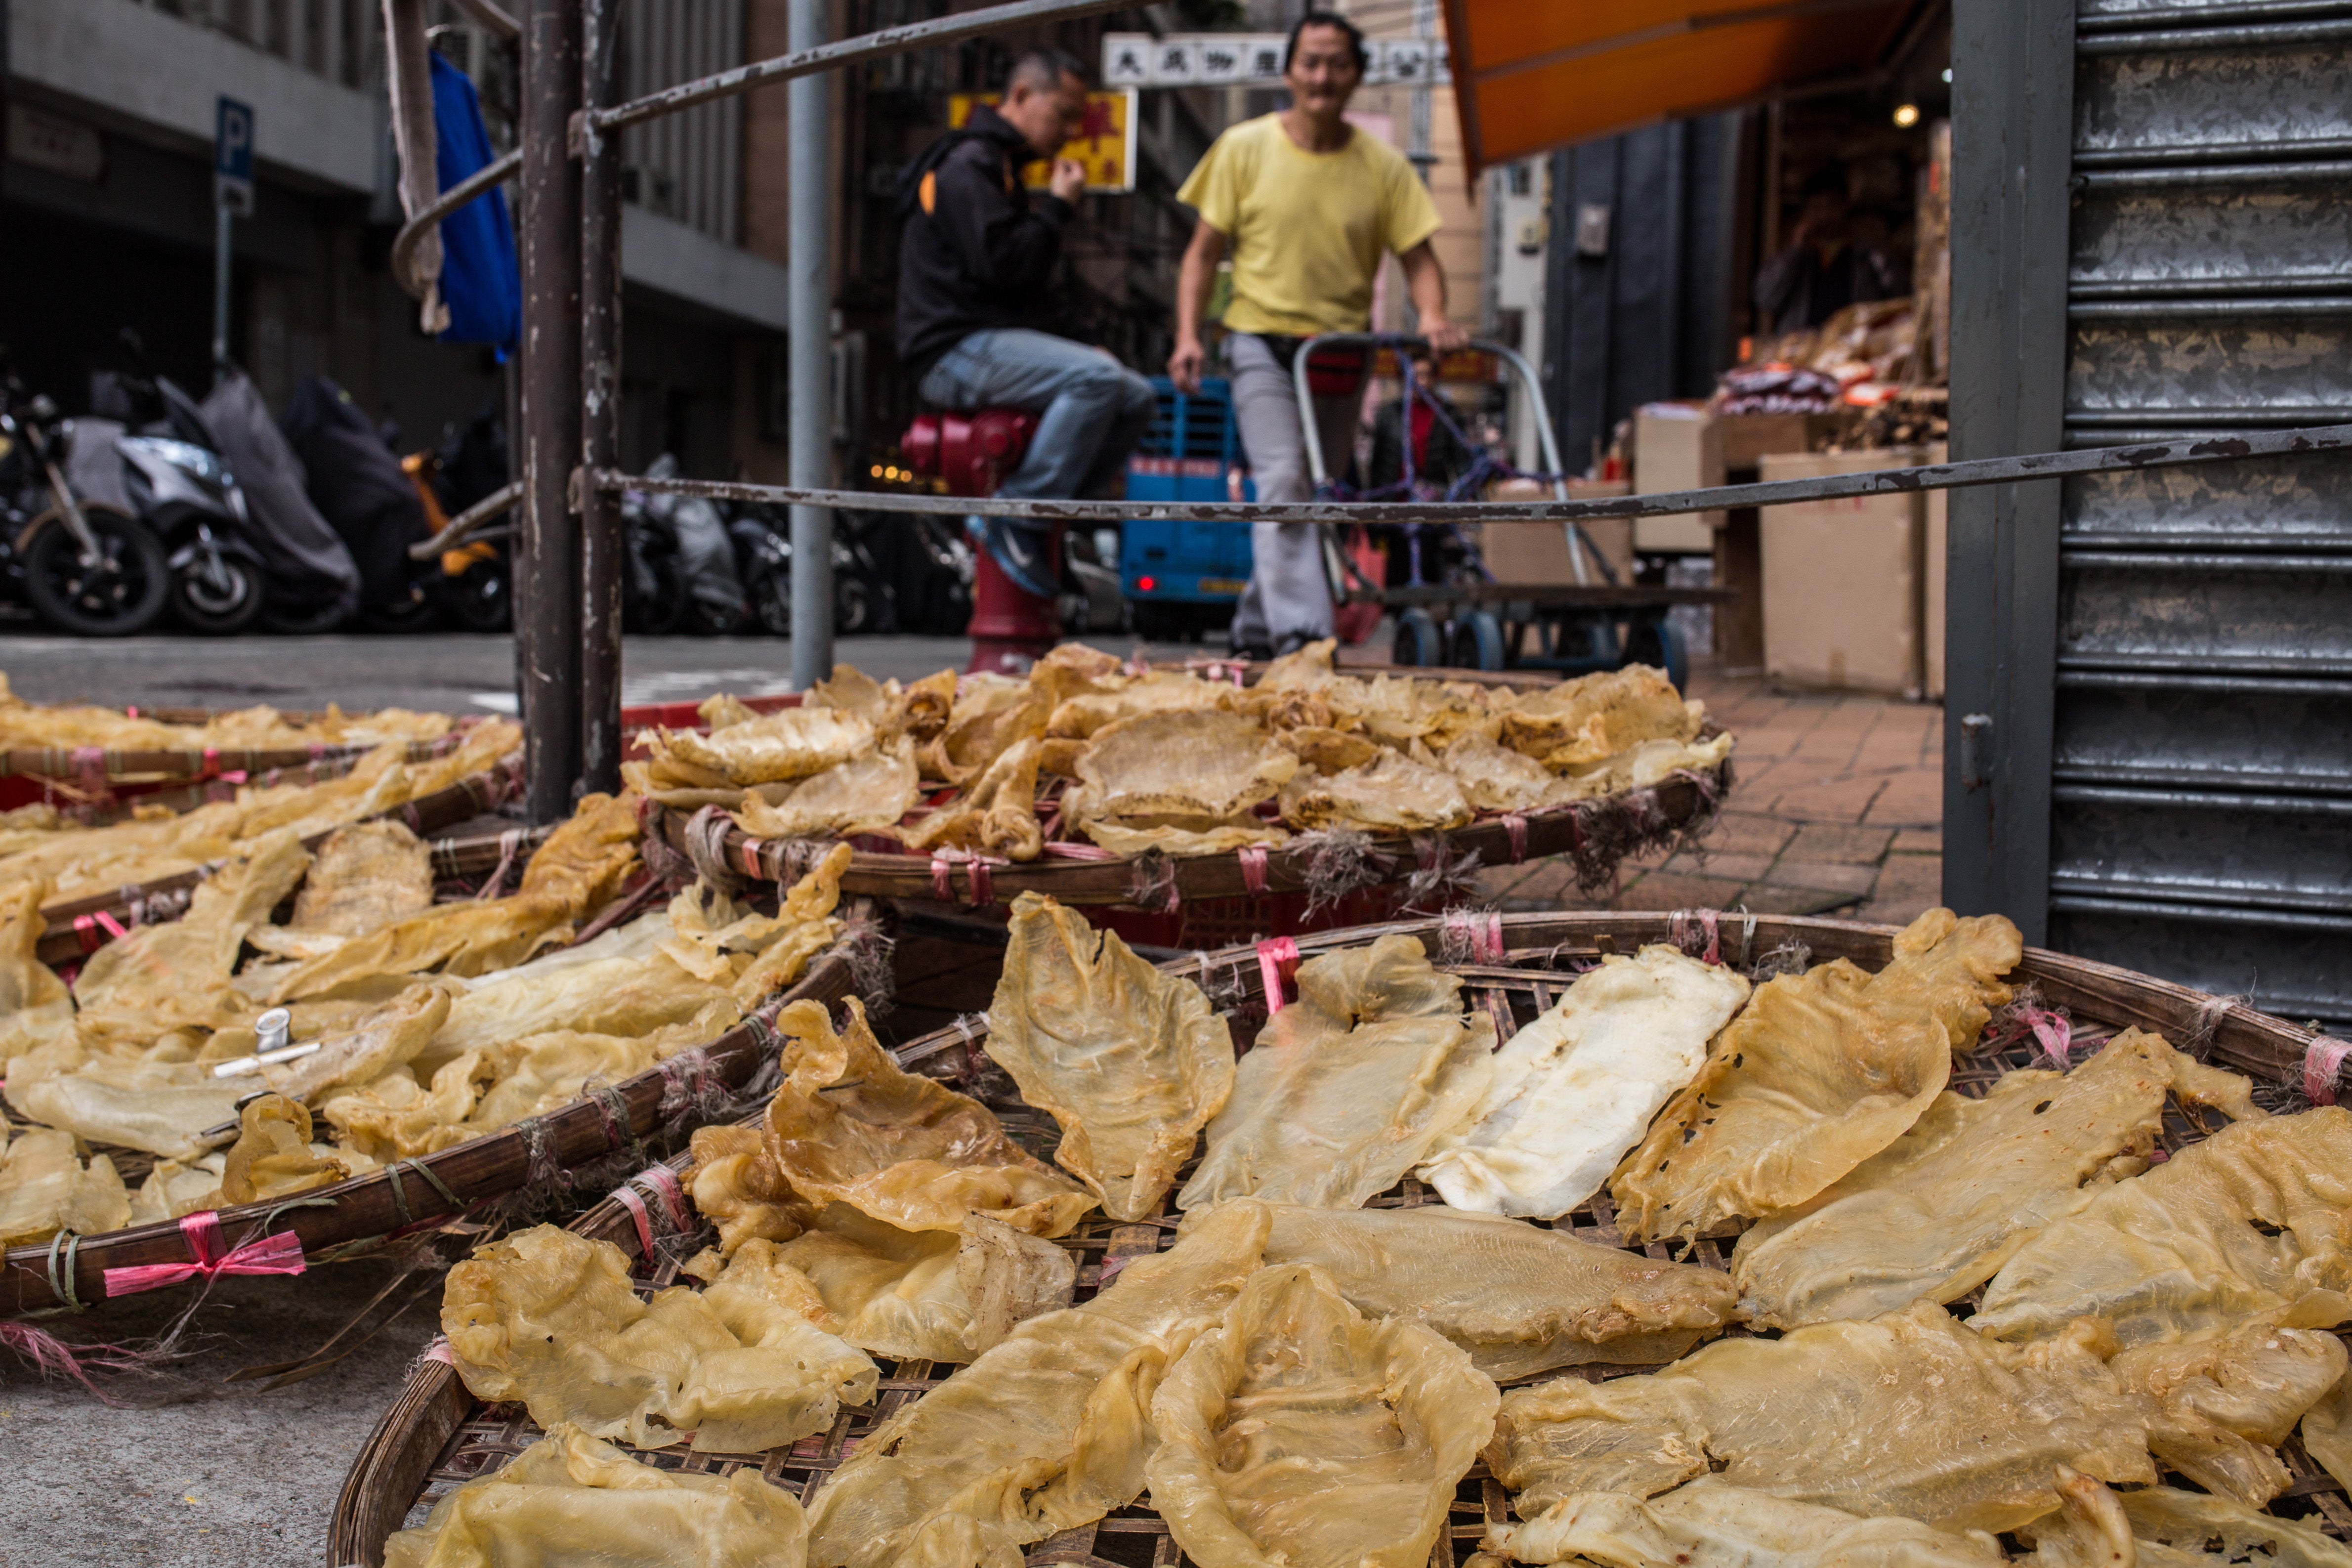 Dried totoaba bladders at a market in Hong Kong. (Photo: ANTHONY WALLACE/AFP, Getty Images)